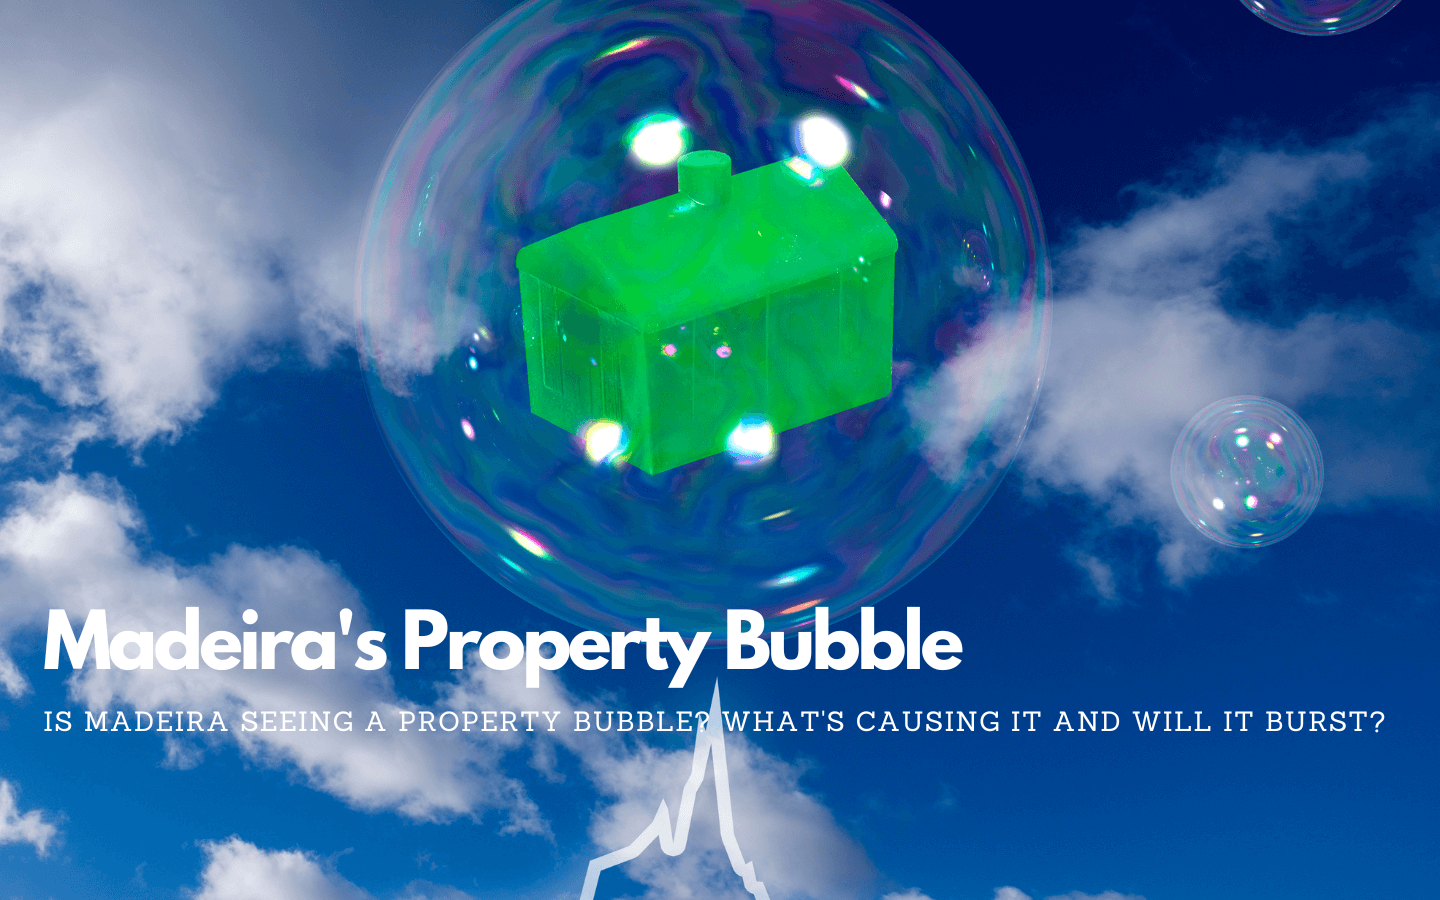 Madeira's Property Bubble